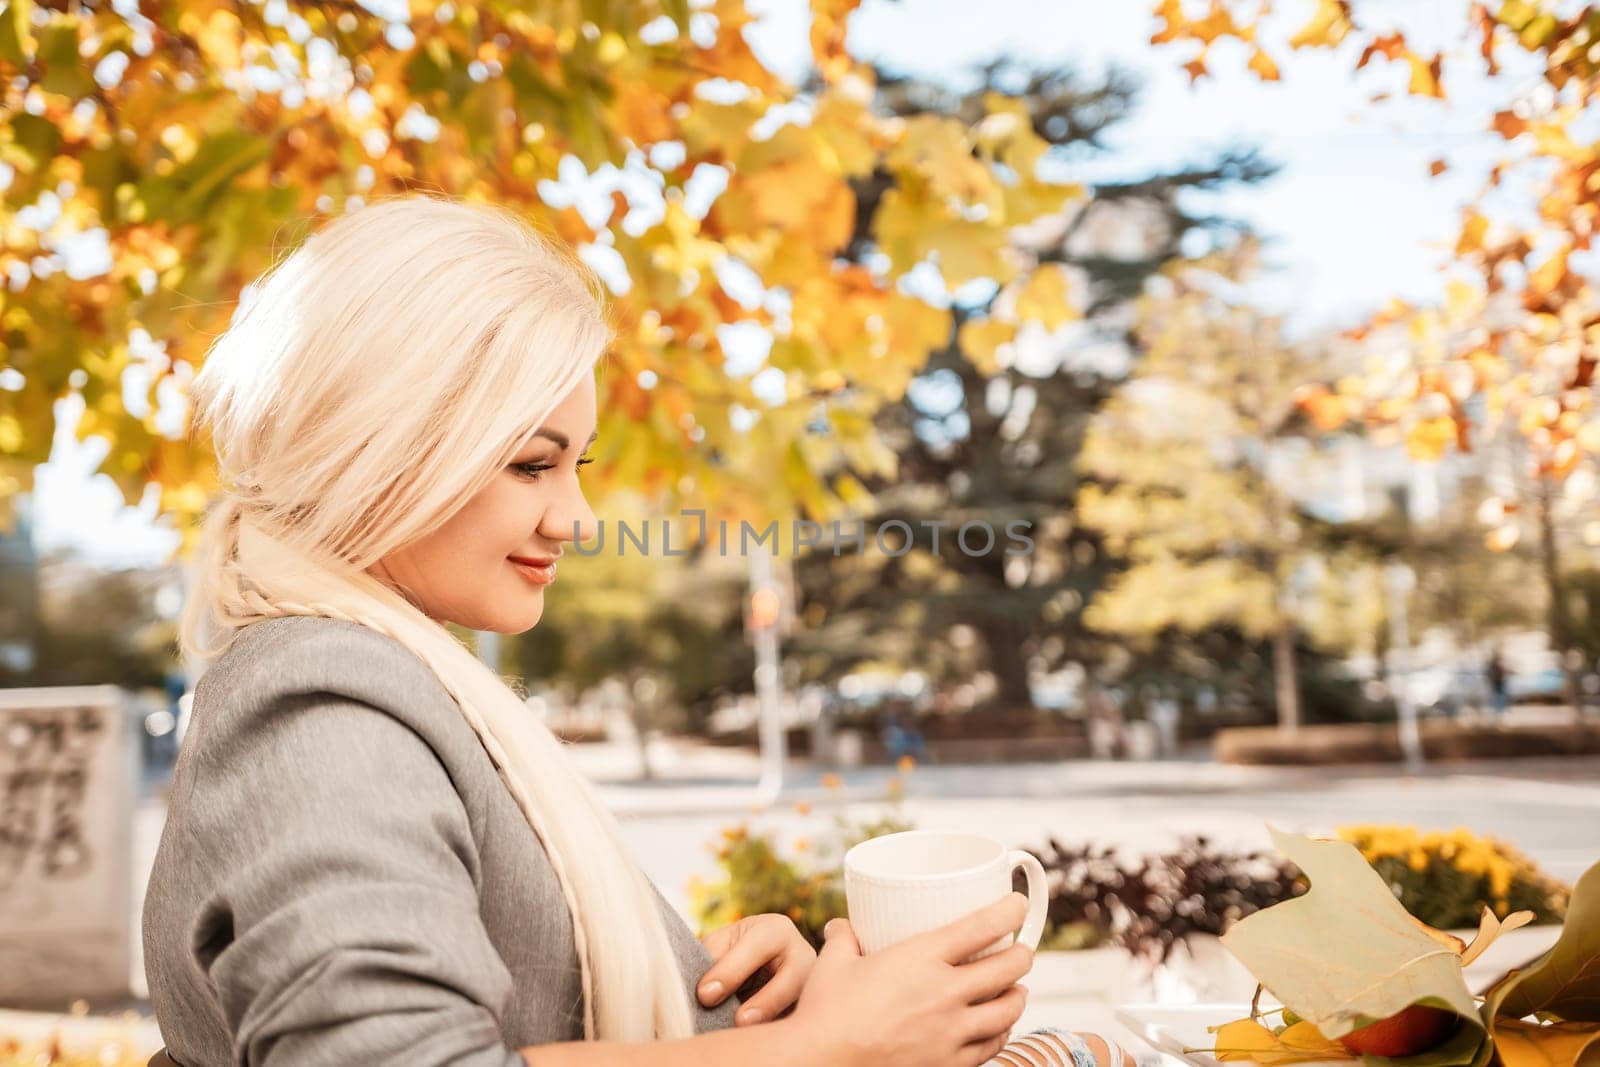 A blonde woman is sitting at a table with a cup of coffee. She is wearing a gray jacket and has a smile on her face. The scene takes place in a park with trees in the background. by Matiunina